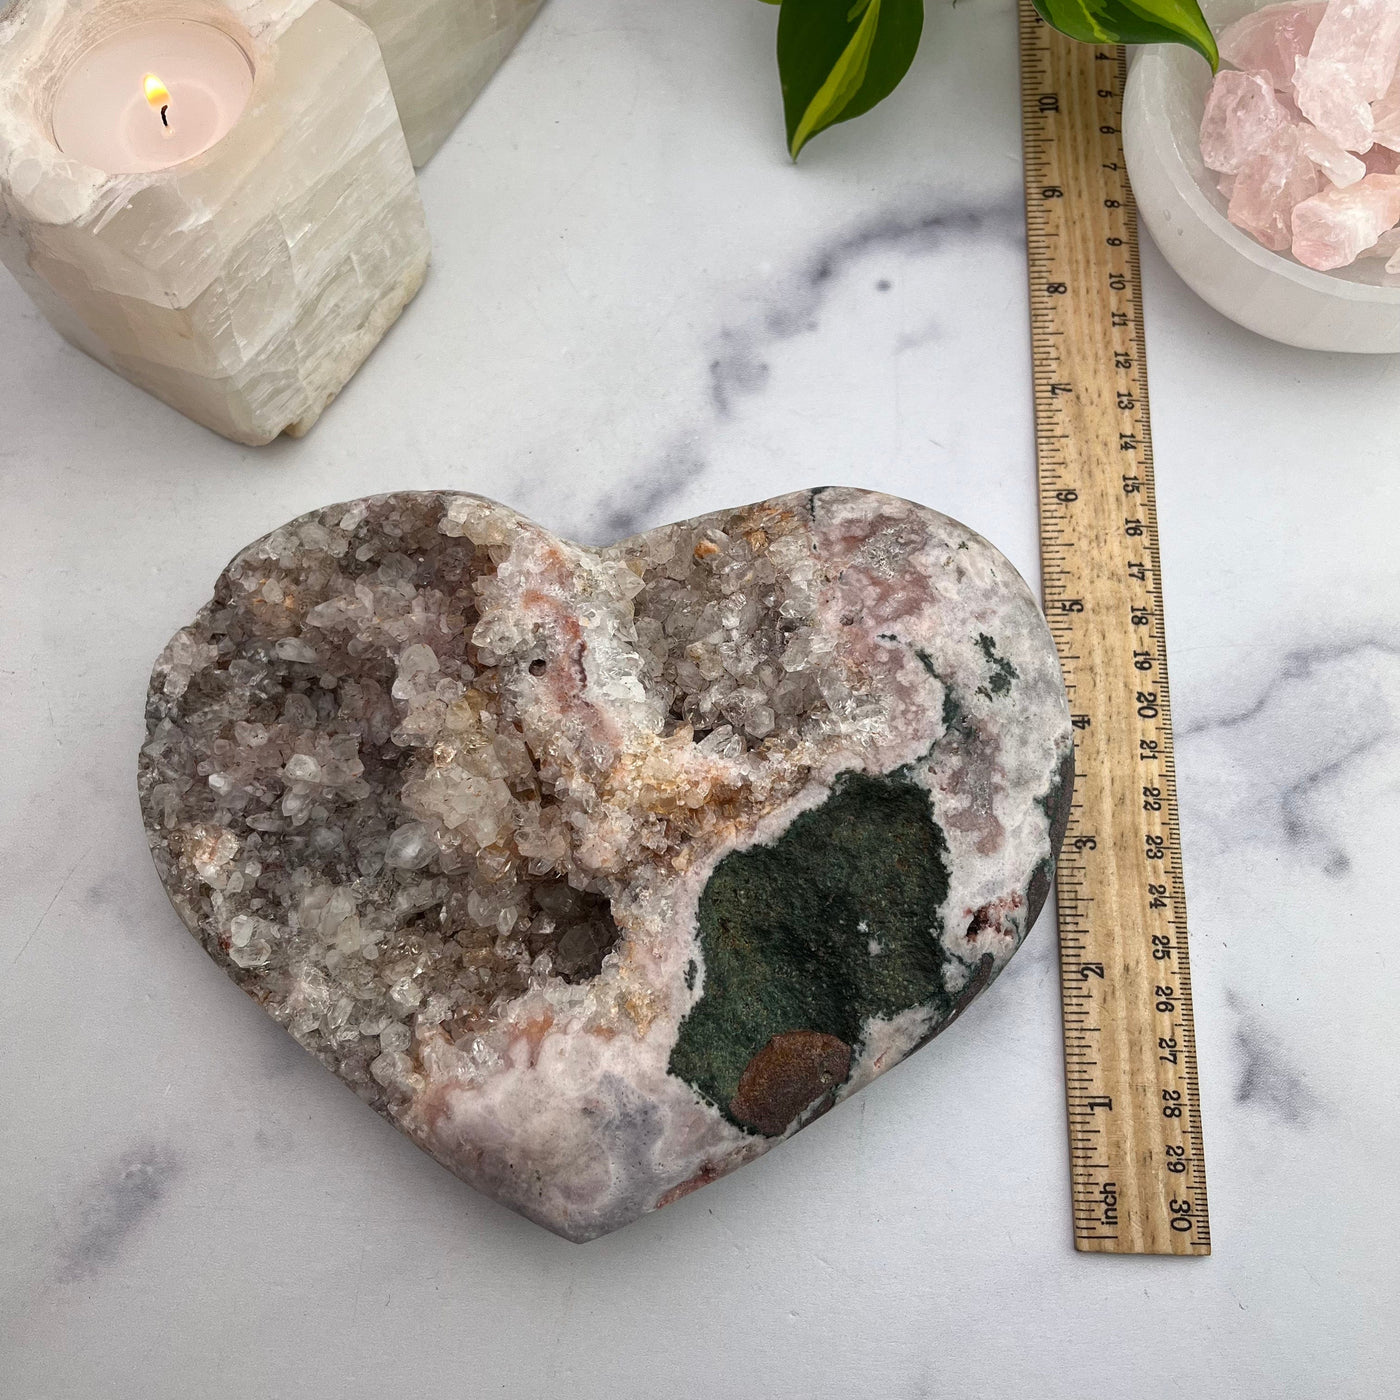 Pink Amethyst Druzy Heart With Ruler For Size Reference 